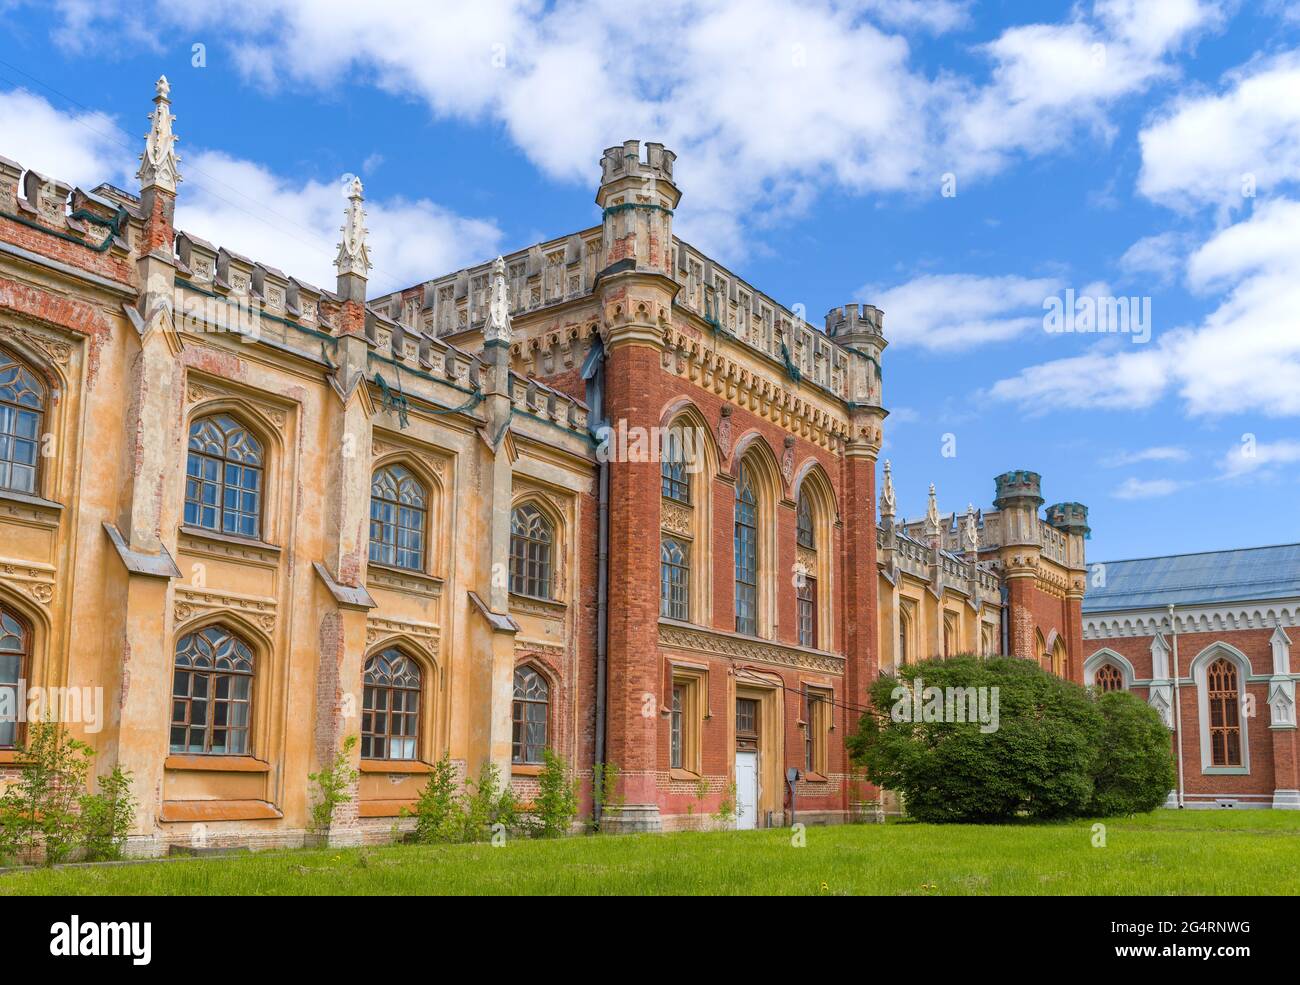 PETRODVORETS, RUSSIA - MAY 29, 2021: Fragment of the old complex of the Imperial Gothic stables on a sunny May day. Peterhof Stock Photo